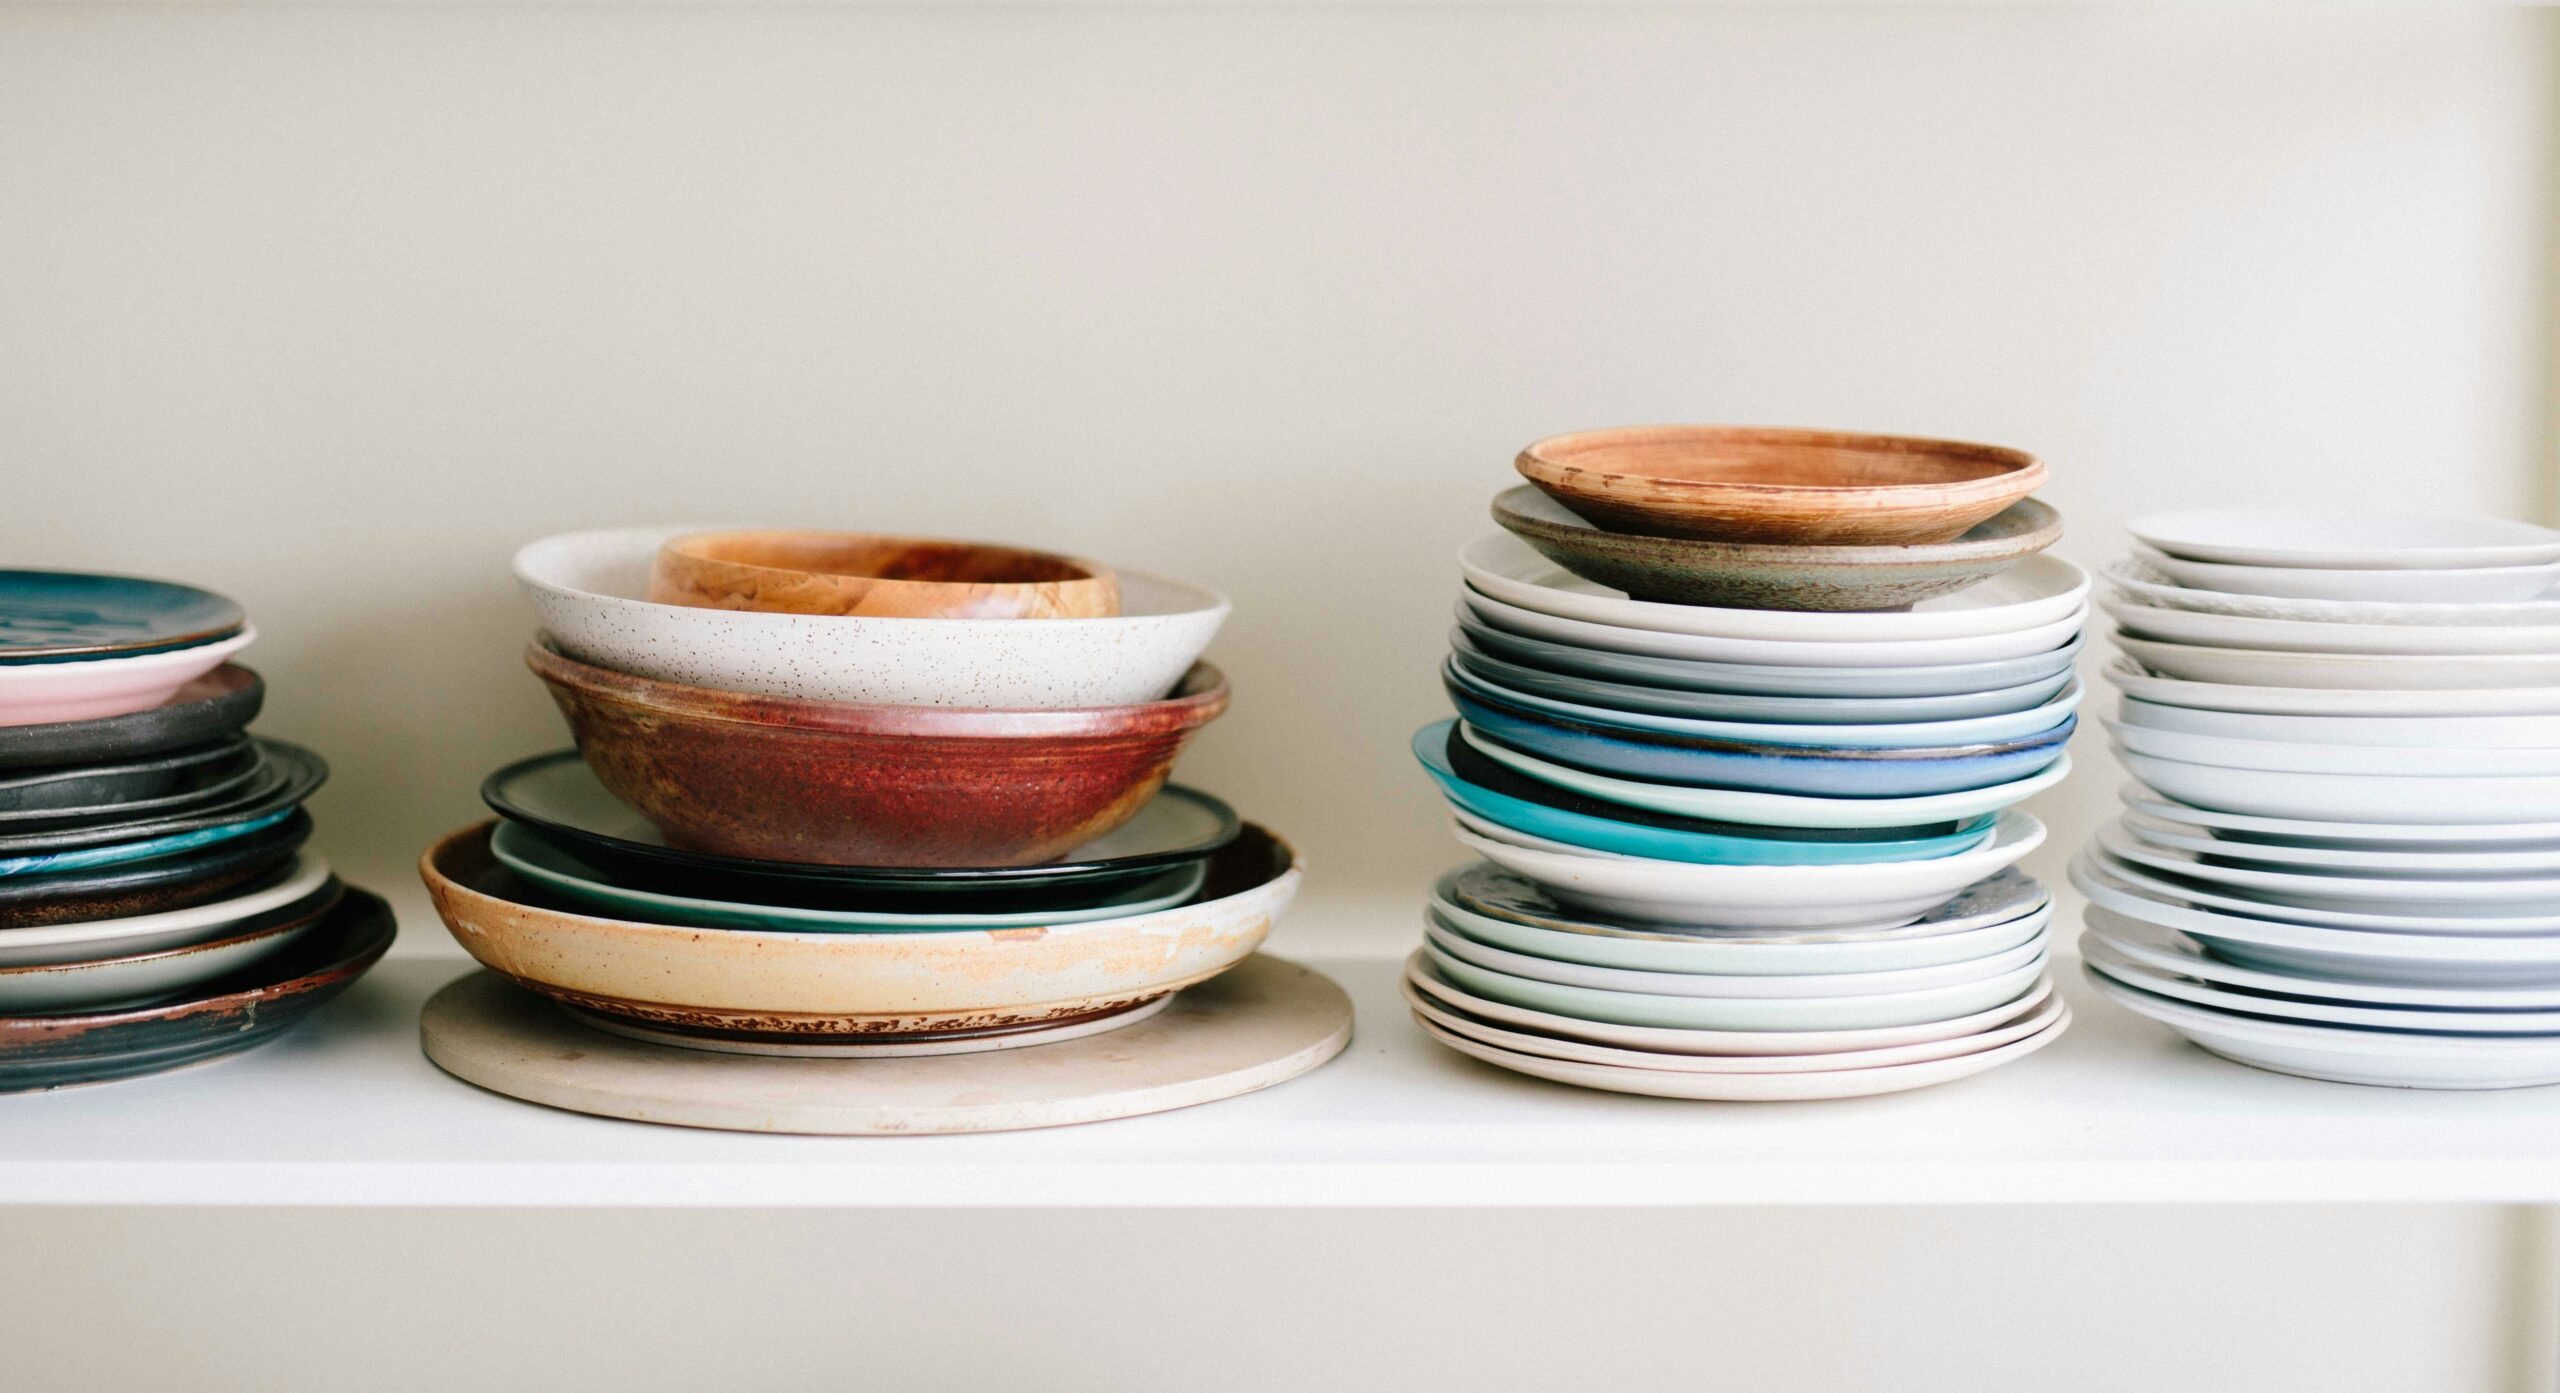 Various stacked ceramic plates and wooden bowls on a white shelf, showcasing a range of earthy and pastel colors, indicative of an organized kitchen cabinet cincinnati ohio